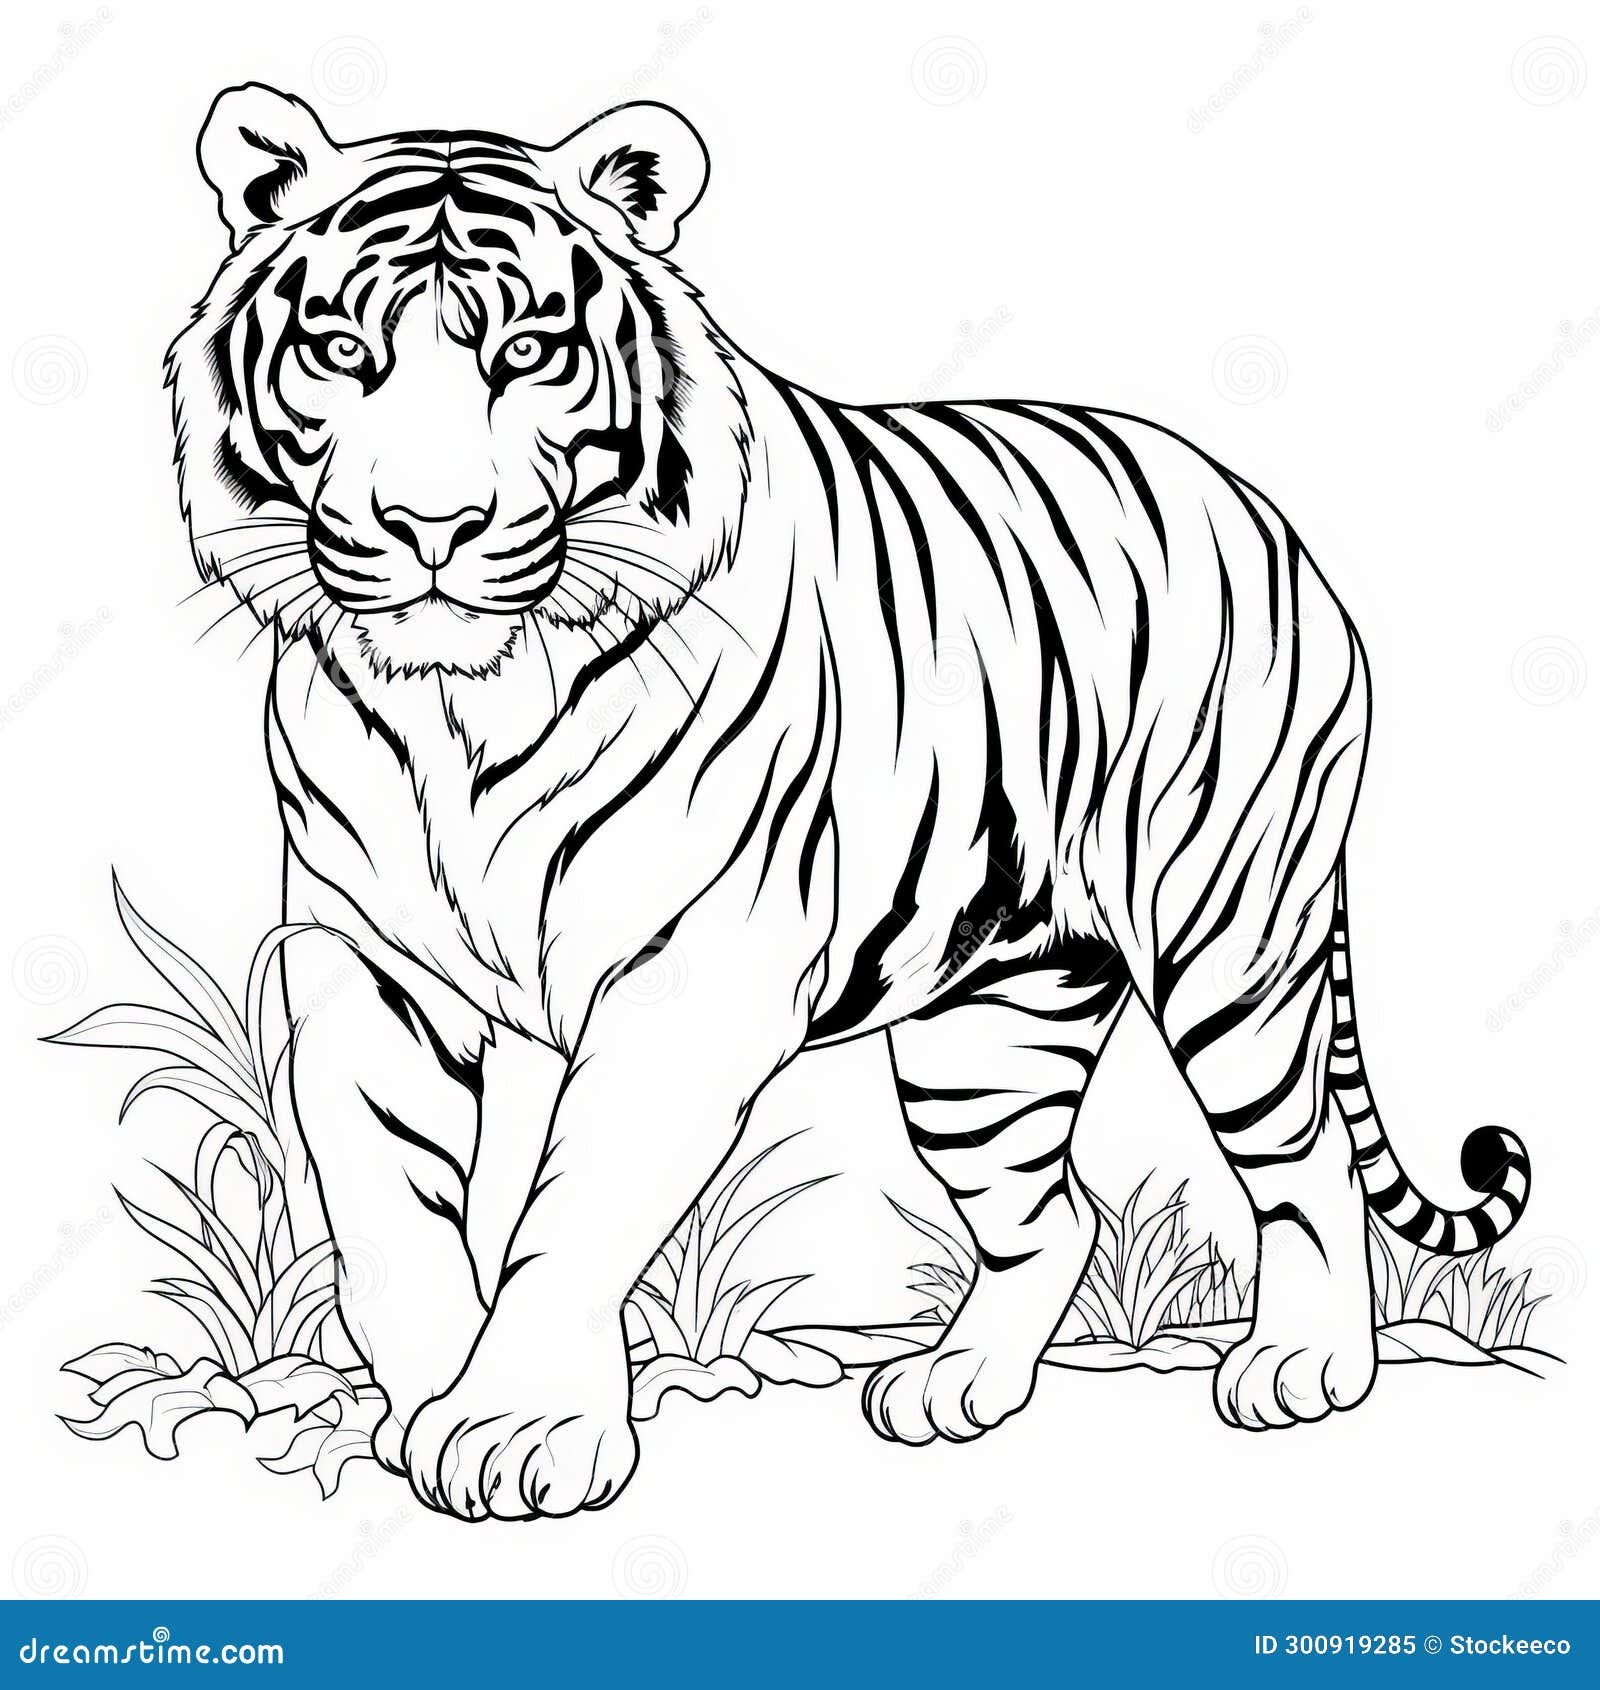 Realistic Tiger Coloring Sheet: Detailed Outline Drawing for Junglepunk ...